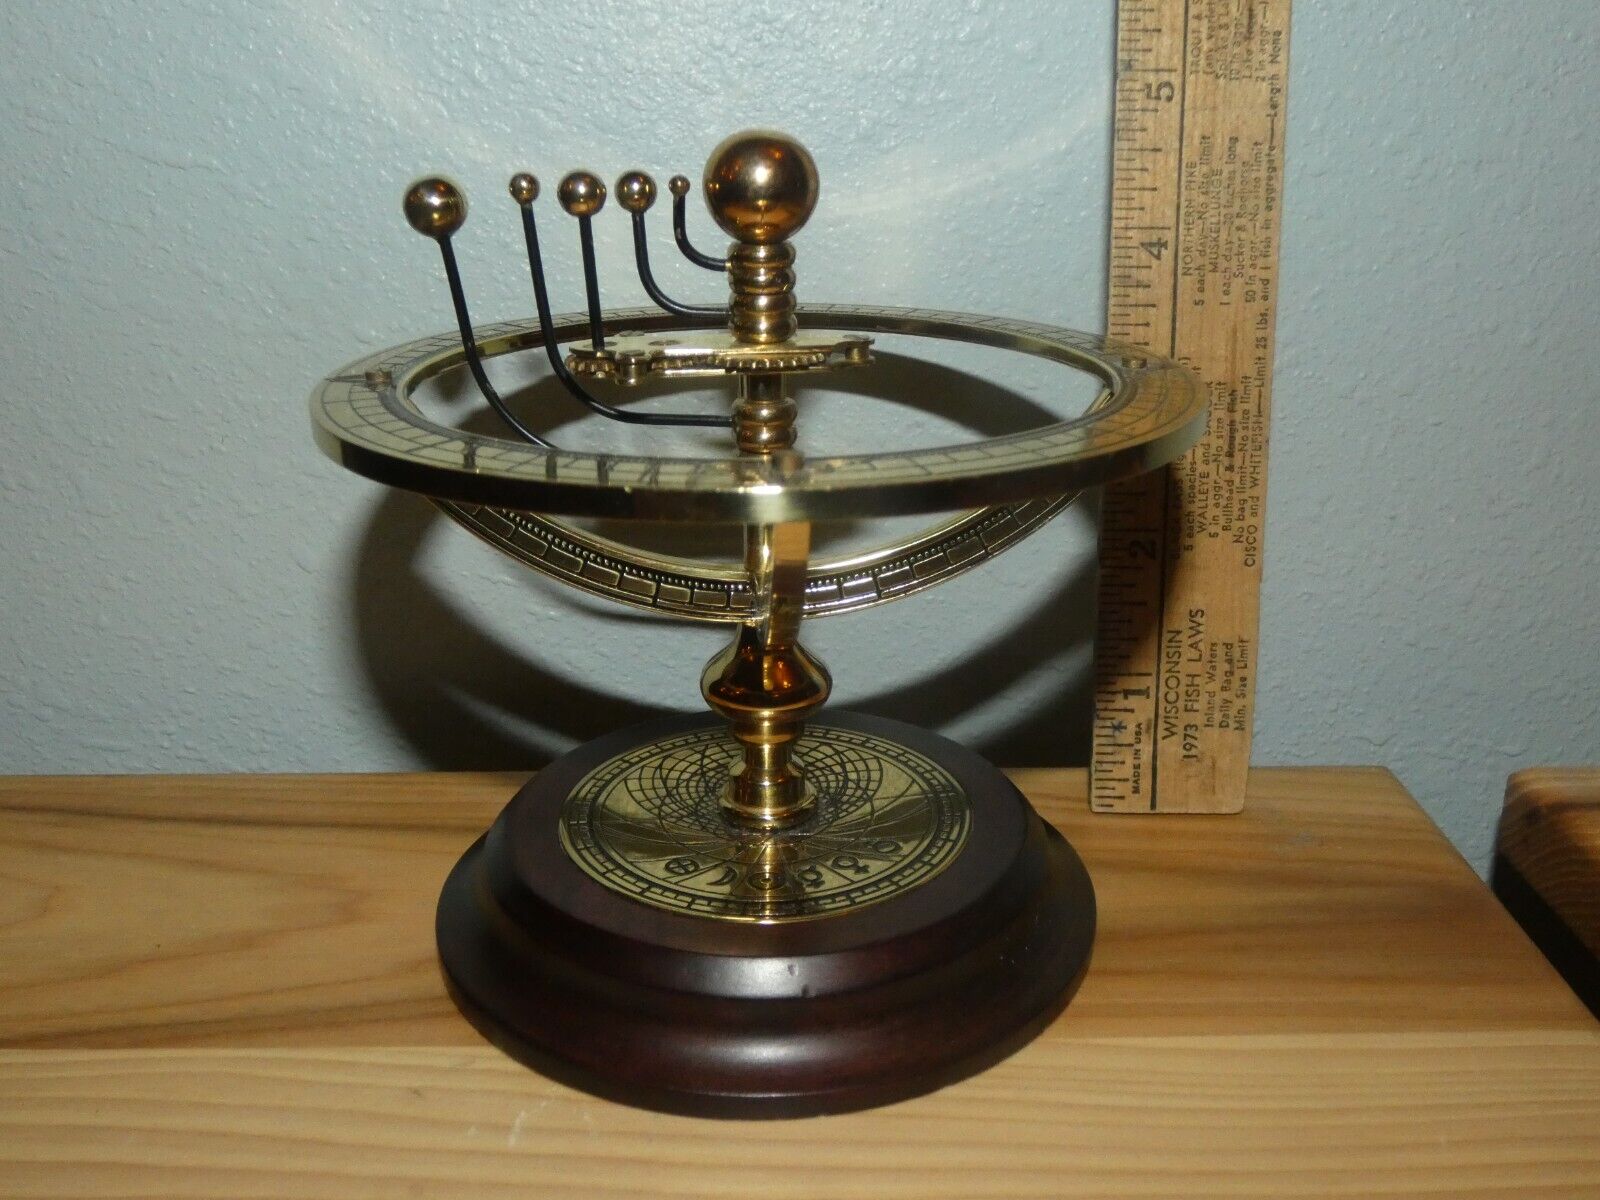 Franklin Mint Orrery Classic Solar System Brass Metal on Wood Base Rare